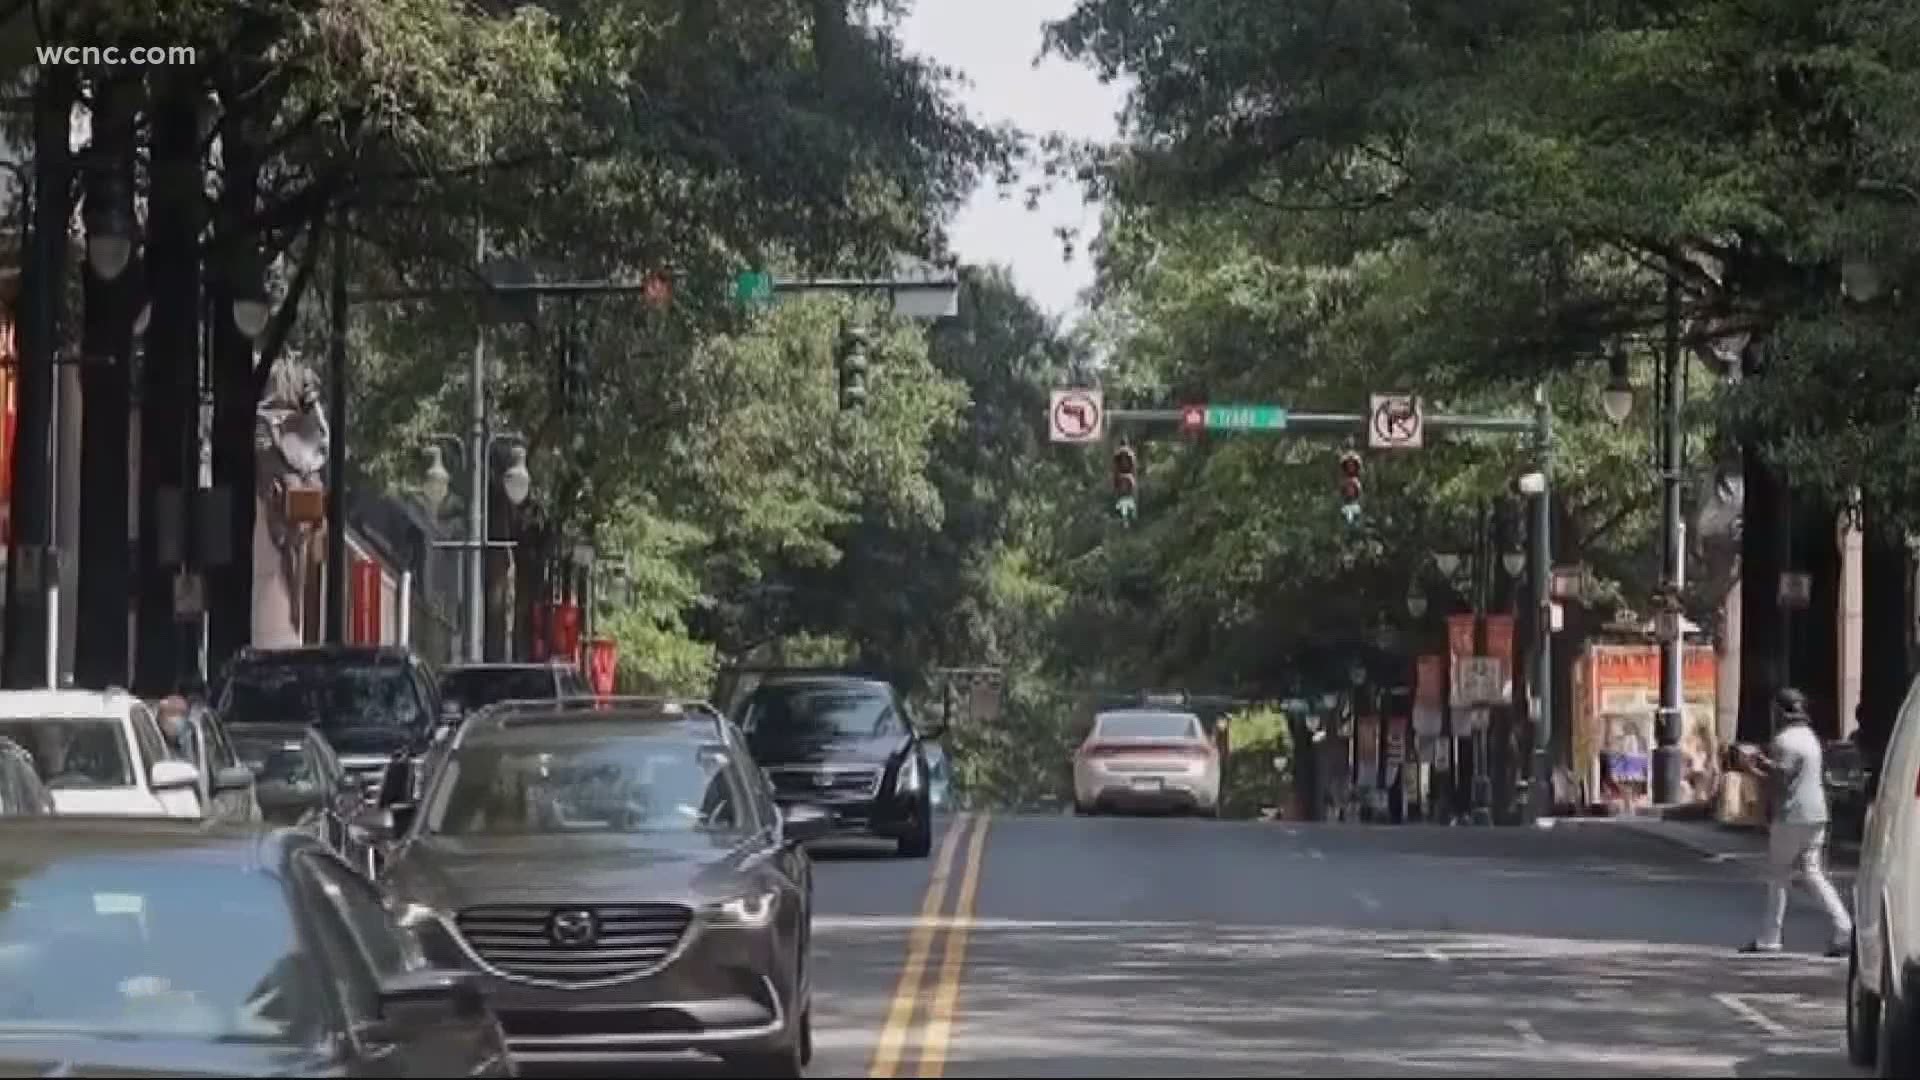 The Queen City is losing some of its natural beauty, from 2012 to 2018 charlotte has lost 4% of its tree canopy.